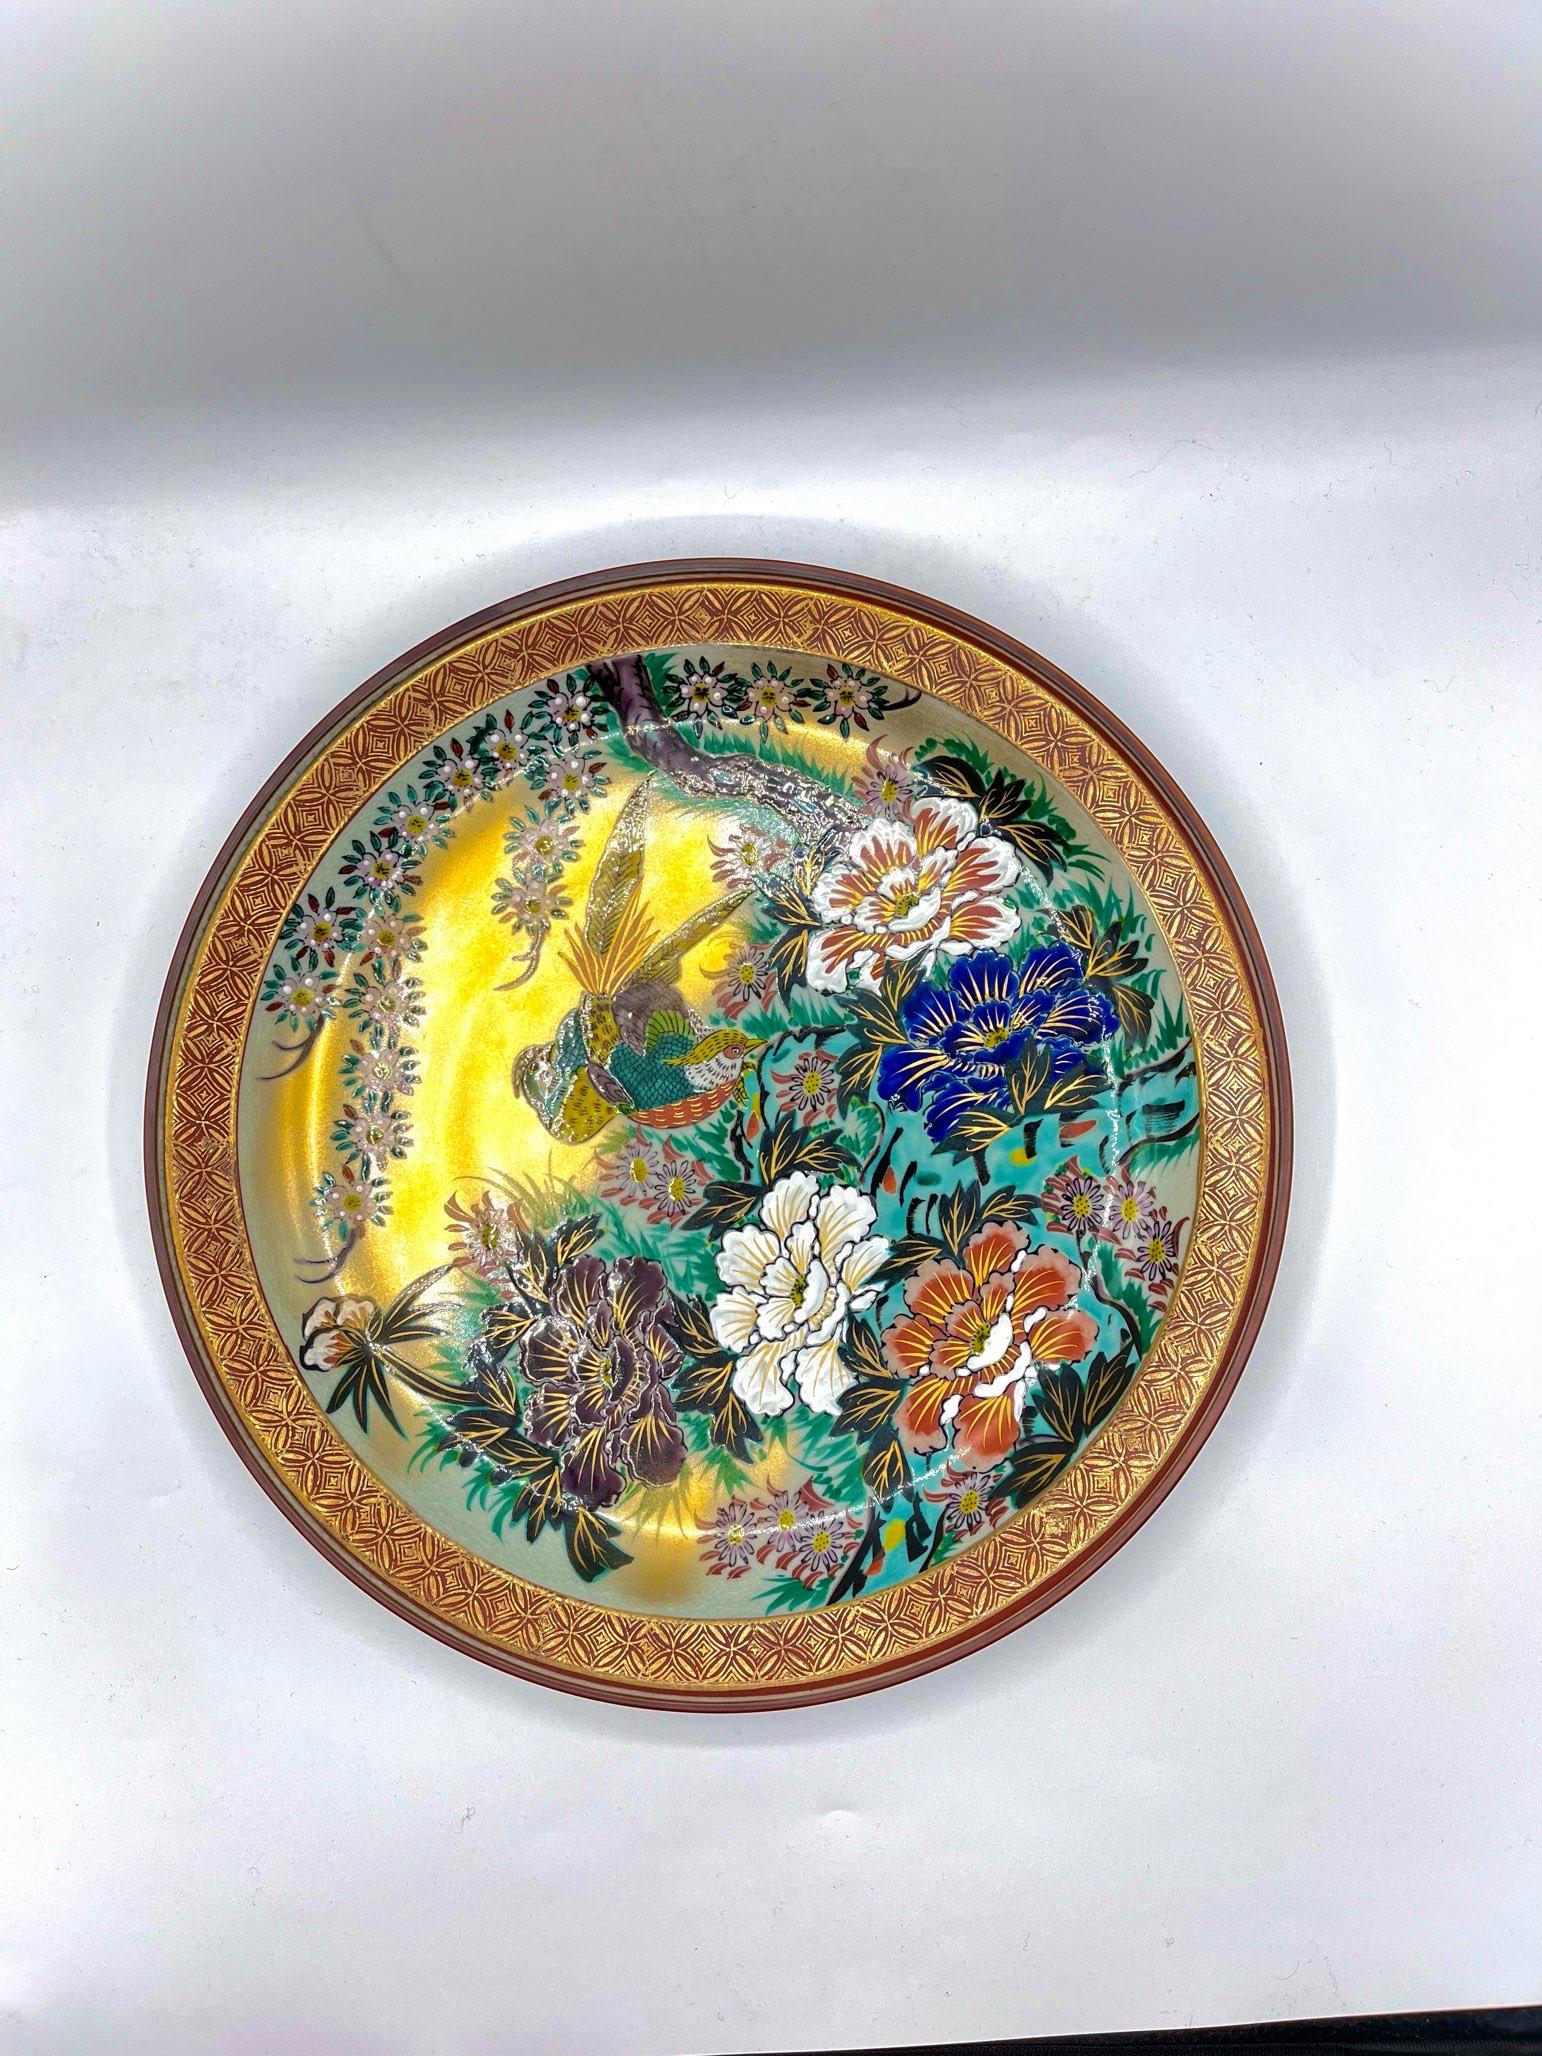 This is Kutani 1950th Century.
This plate was made with porcelain, style of kutaniyaki.
It is a traditional craft of ceramics with overglaze painting and was born in the early Edo period. Kutani ware is characterized by bright colors, bold and